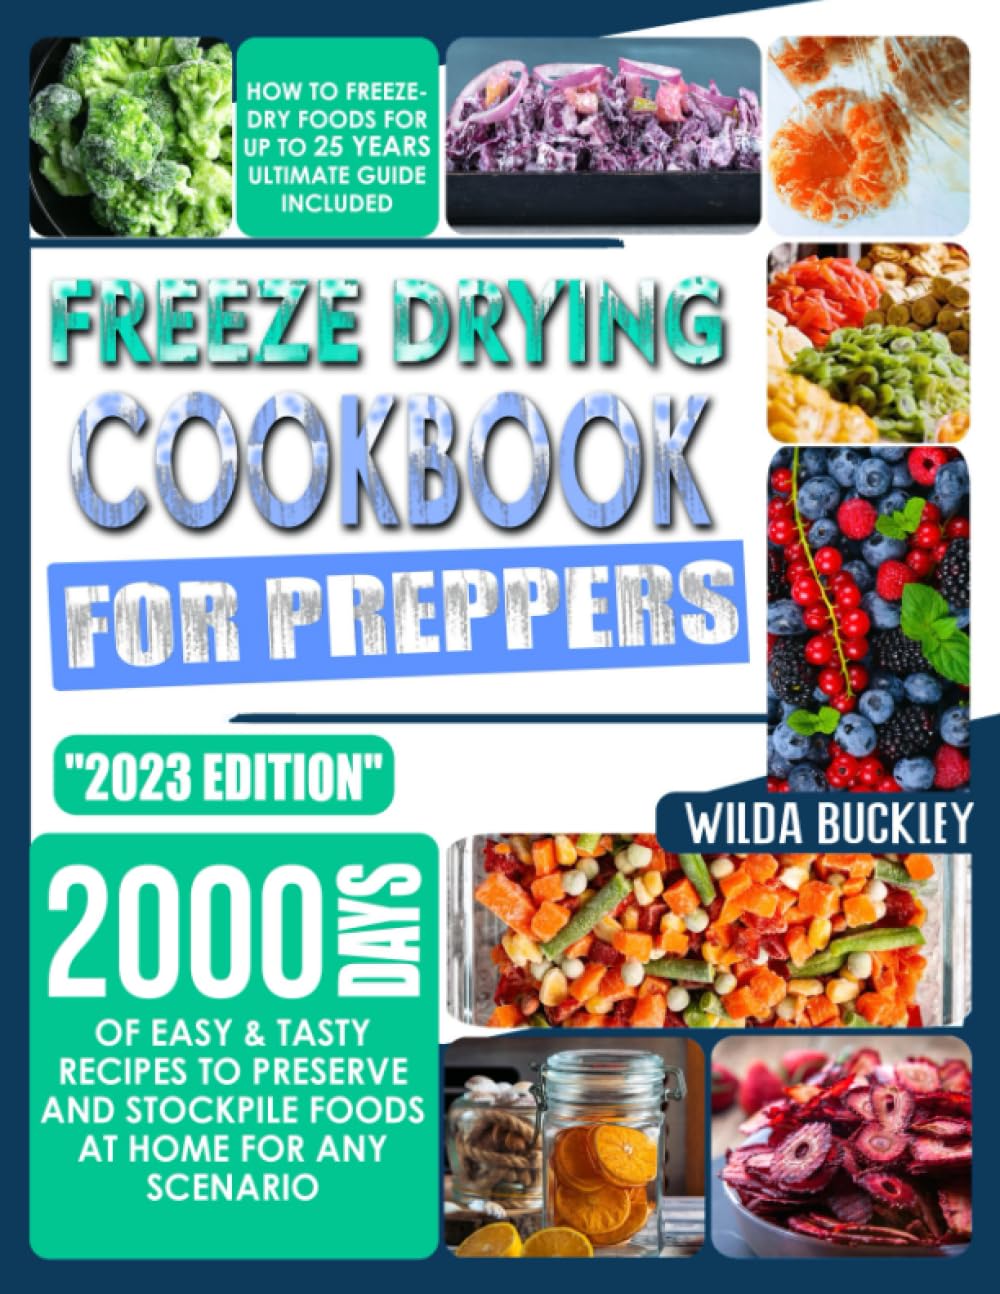 Freeze Drying Cookbook for Preppers: 2000 Days of Easy & Tasty Recipes to Preserve and Stockpile Foods at Home for any Scenario. How To Freeze-Dry Foods for up to 25 Years Ultimate Guide Included